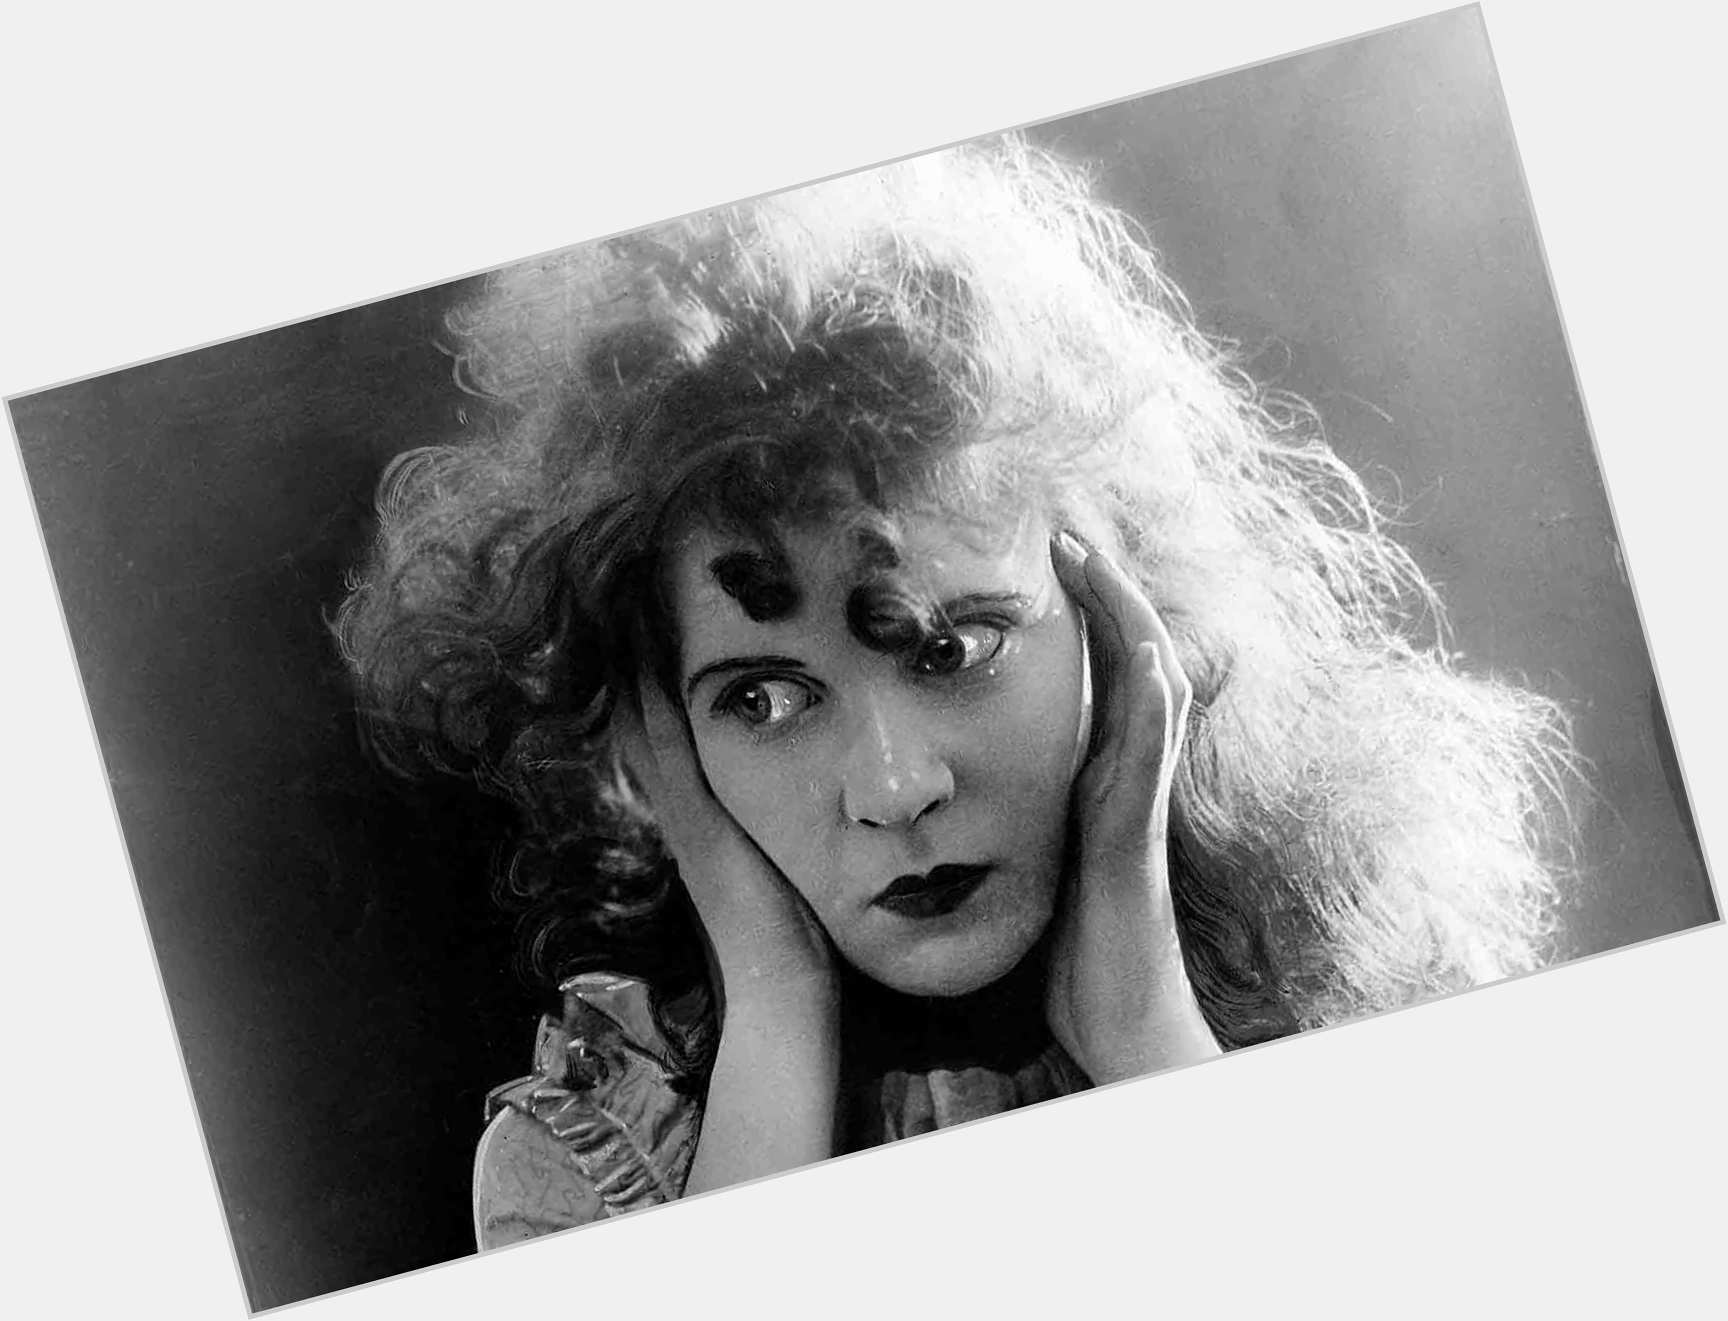 <a href="/hot-men/d-w-griffith/is-he-dw-racist-why-important-film-history">D W Griffith</a> Slim body,  